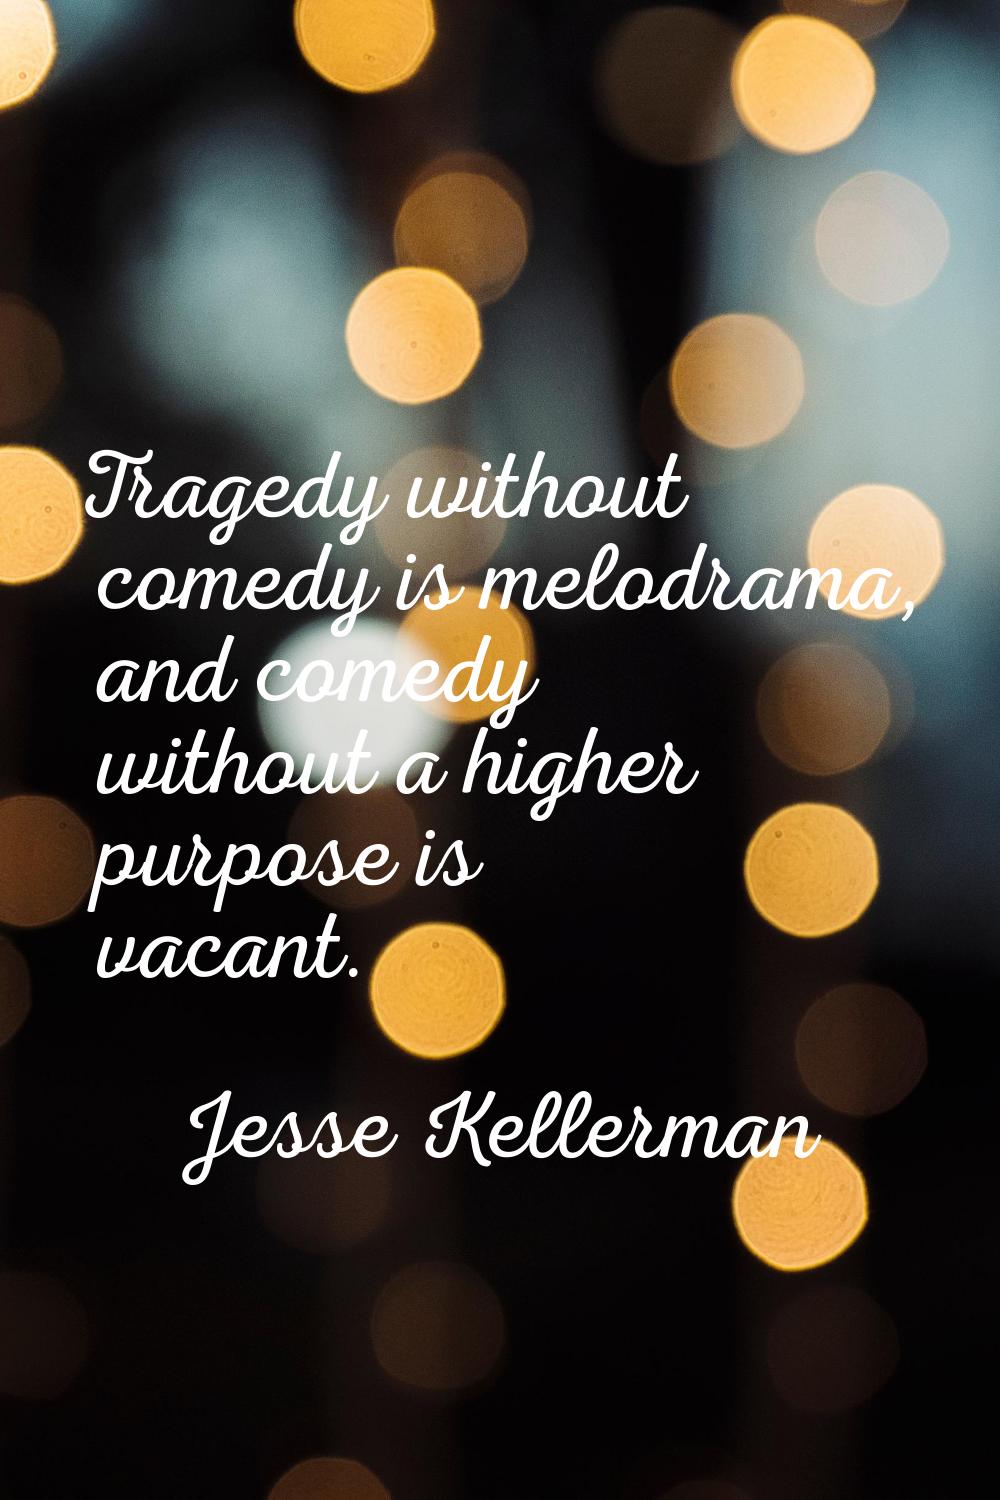 Tragedy without comedy is melodrama, and comedy without a higher purpose is vacant.